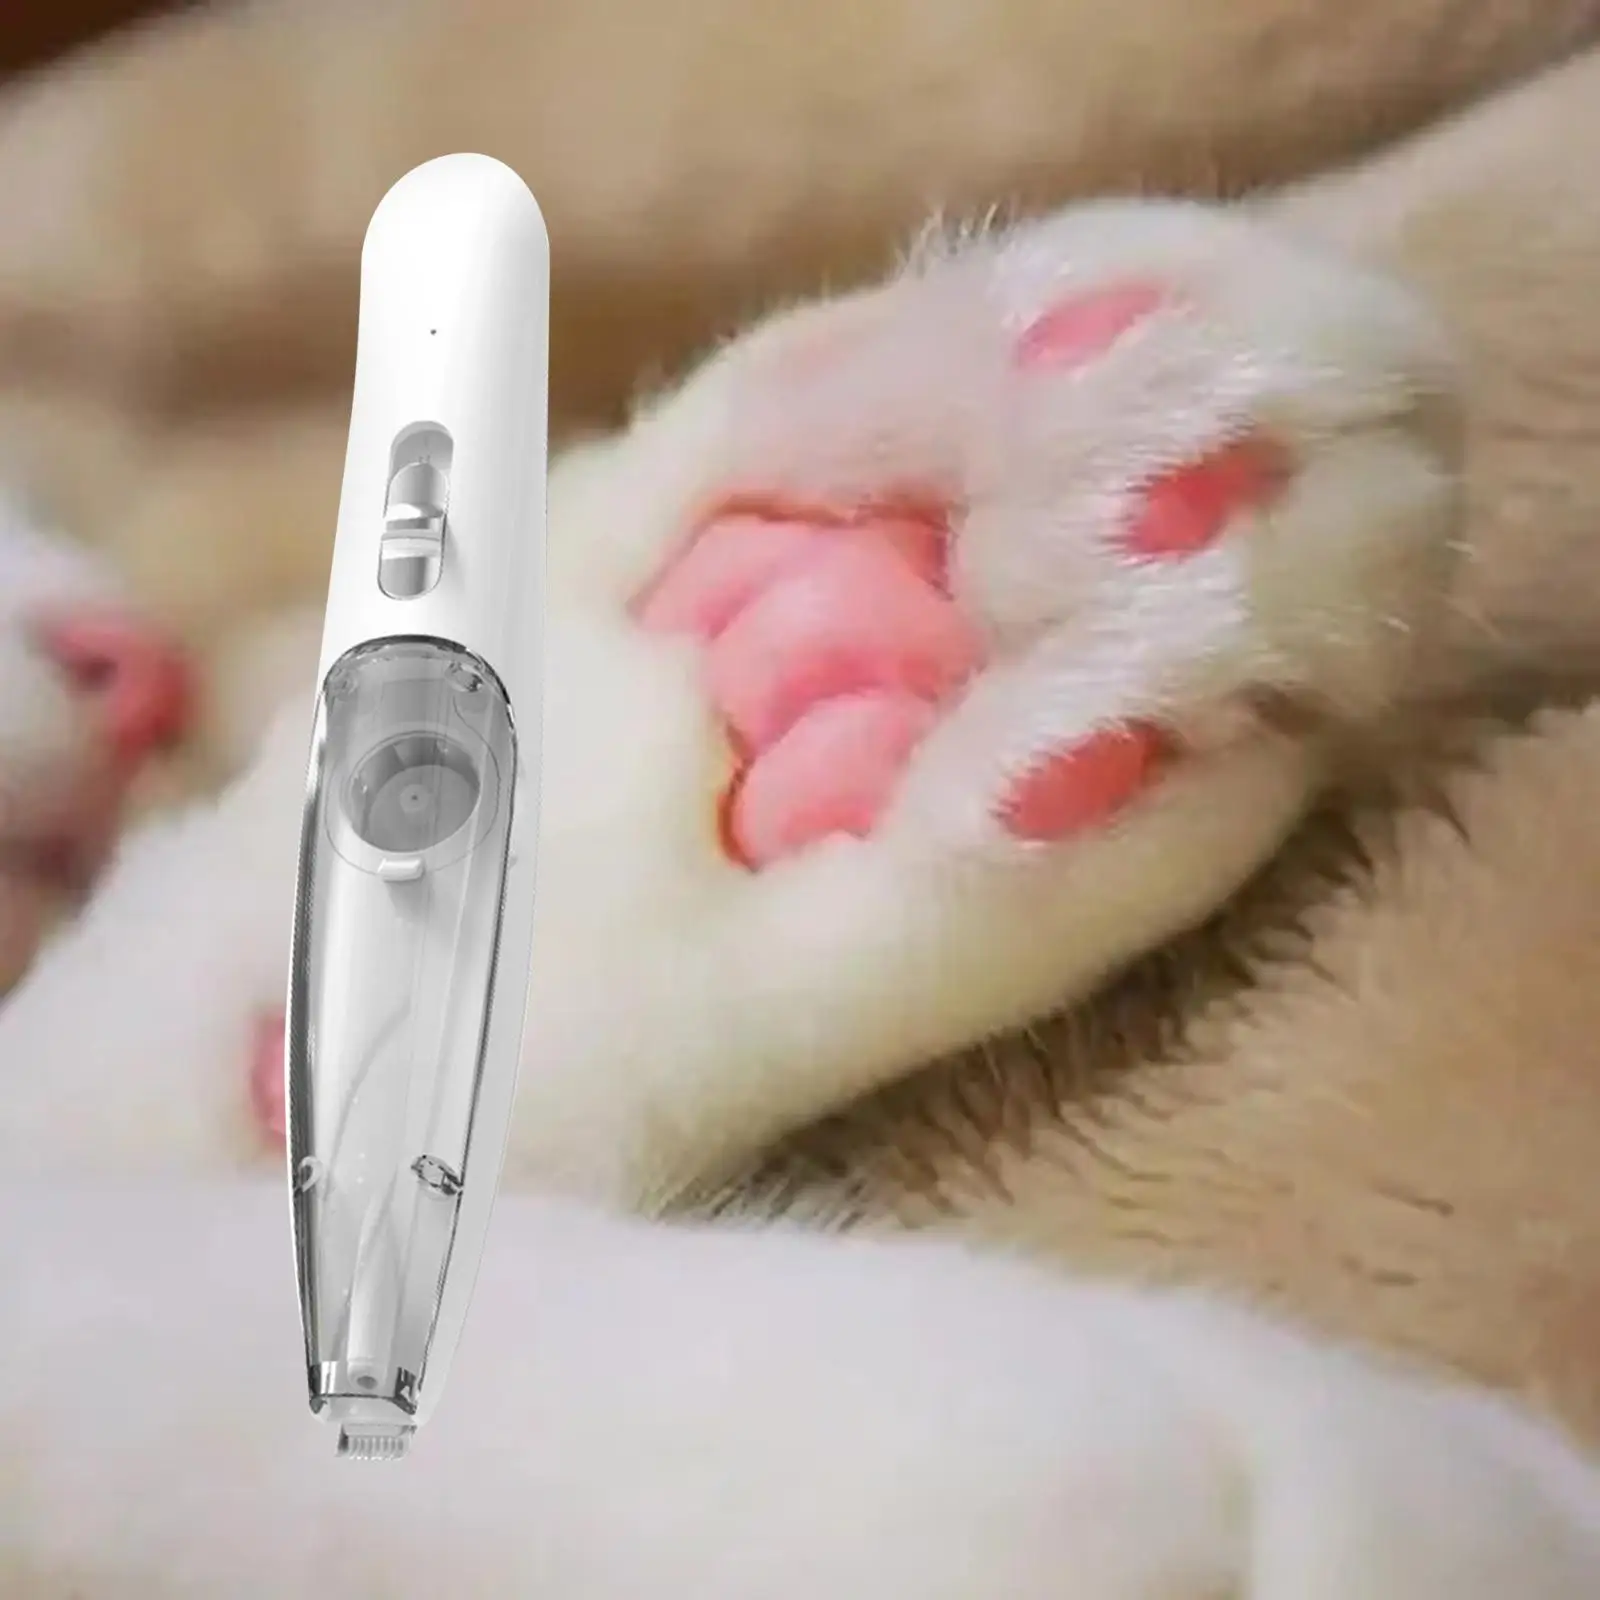 Paw Hair Trimmer for Dog Cordless Paw Trimmer Light Puppy Grooming Trimmer Cat Trimmer for Pets Dogs Cats Grooming Tools